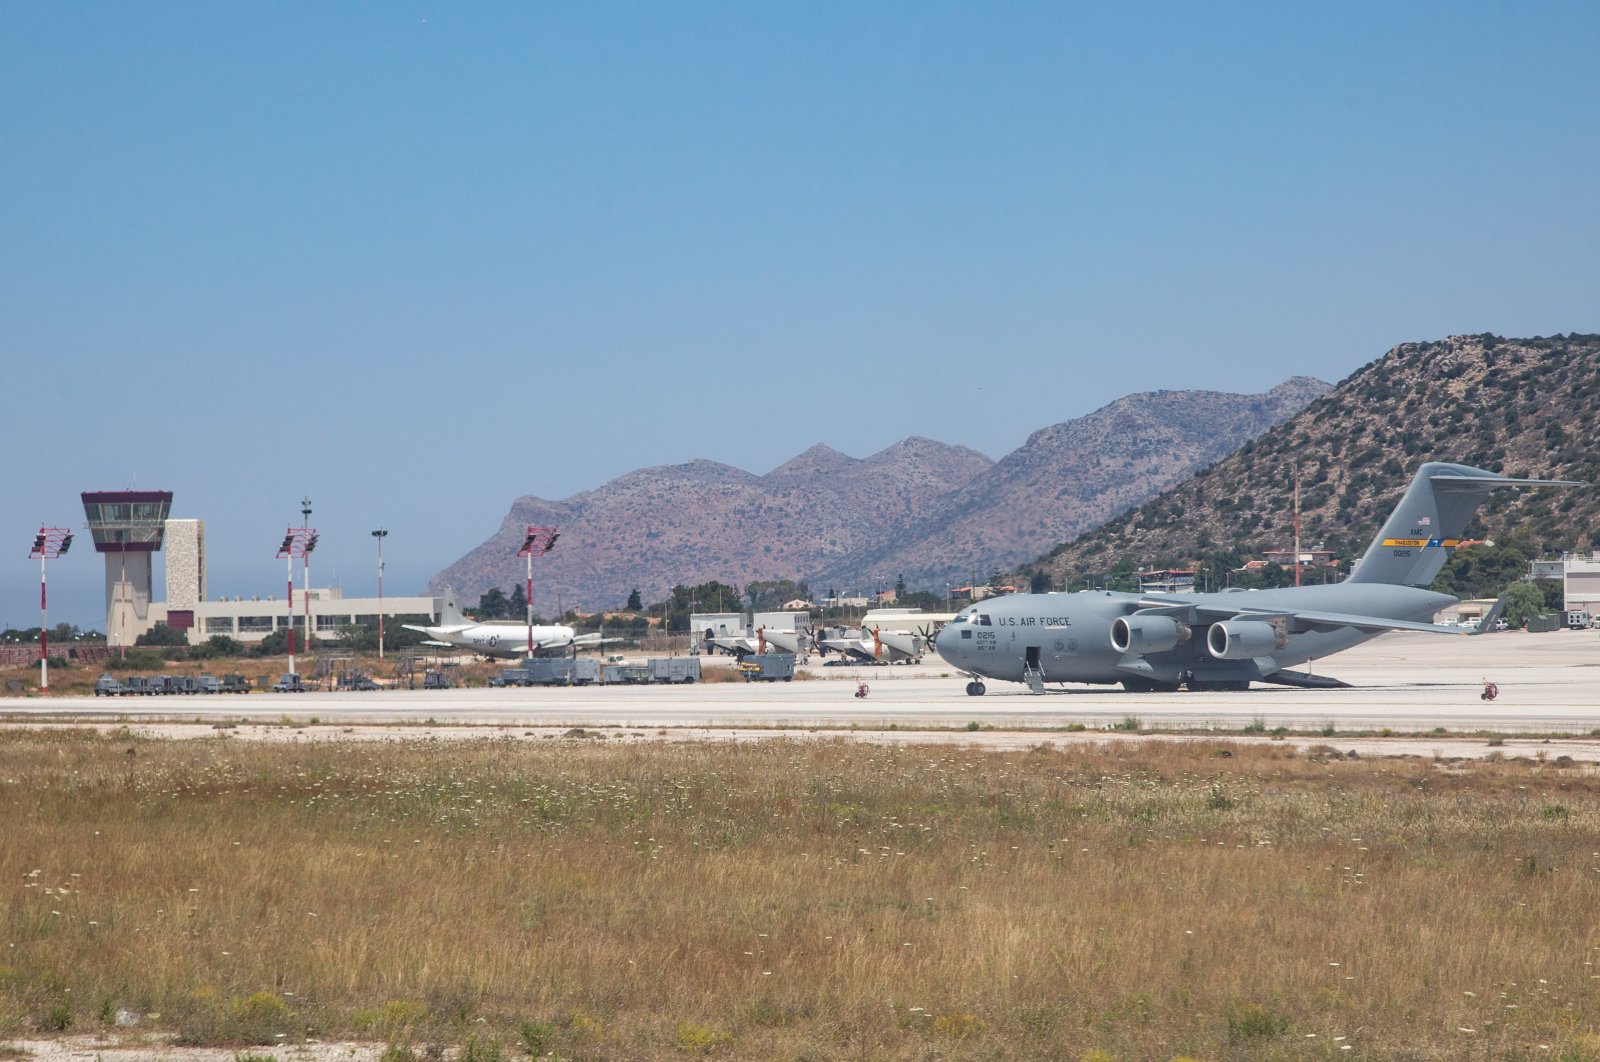 Two United States Air Force planes are seen at Chania International Airport, located near Souda Bay on the island of Crete, Greece. (Reuters Photo)